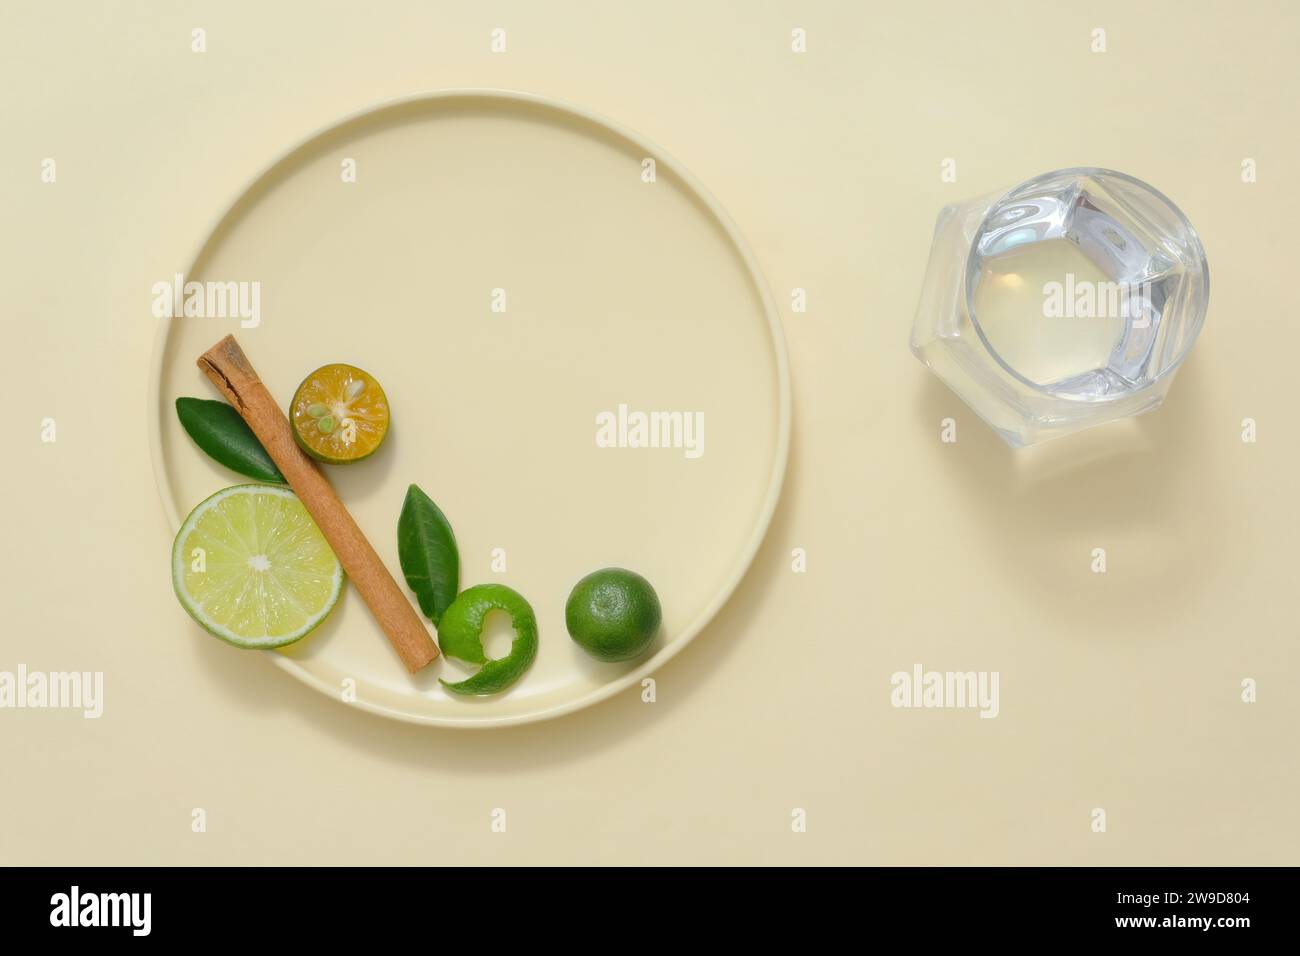 A round ceramic dishes containing slices of lime and kumquat, green leaves and dried cinnamon stick decorated with glass cup of water. Space for desig Stock Photo